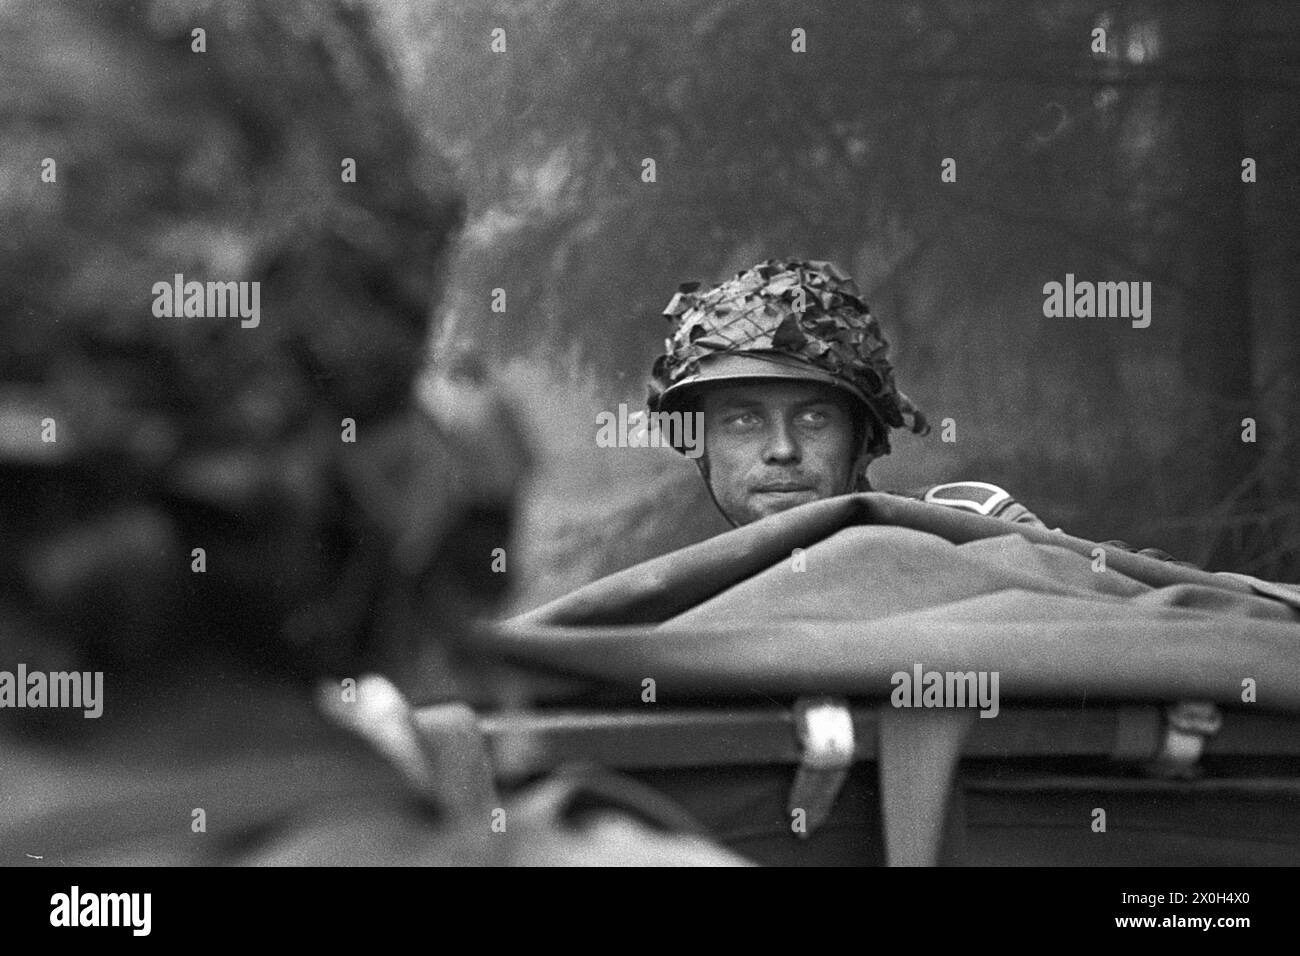 During a combat exercise, a soldier of the German Armed Forces rides on a vehicle at the head of a company and looks around to the rear. [automated translation] Stock Photo